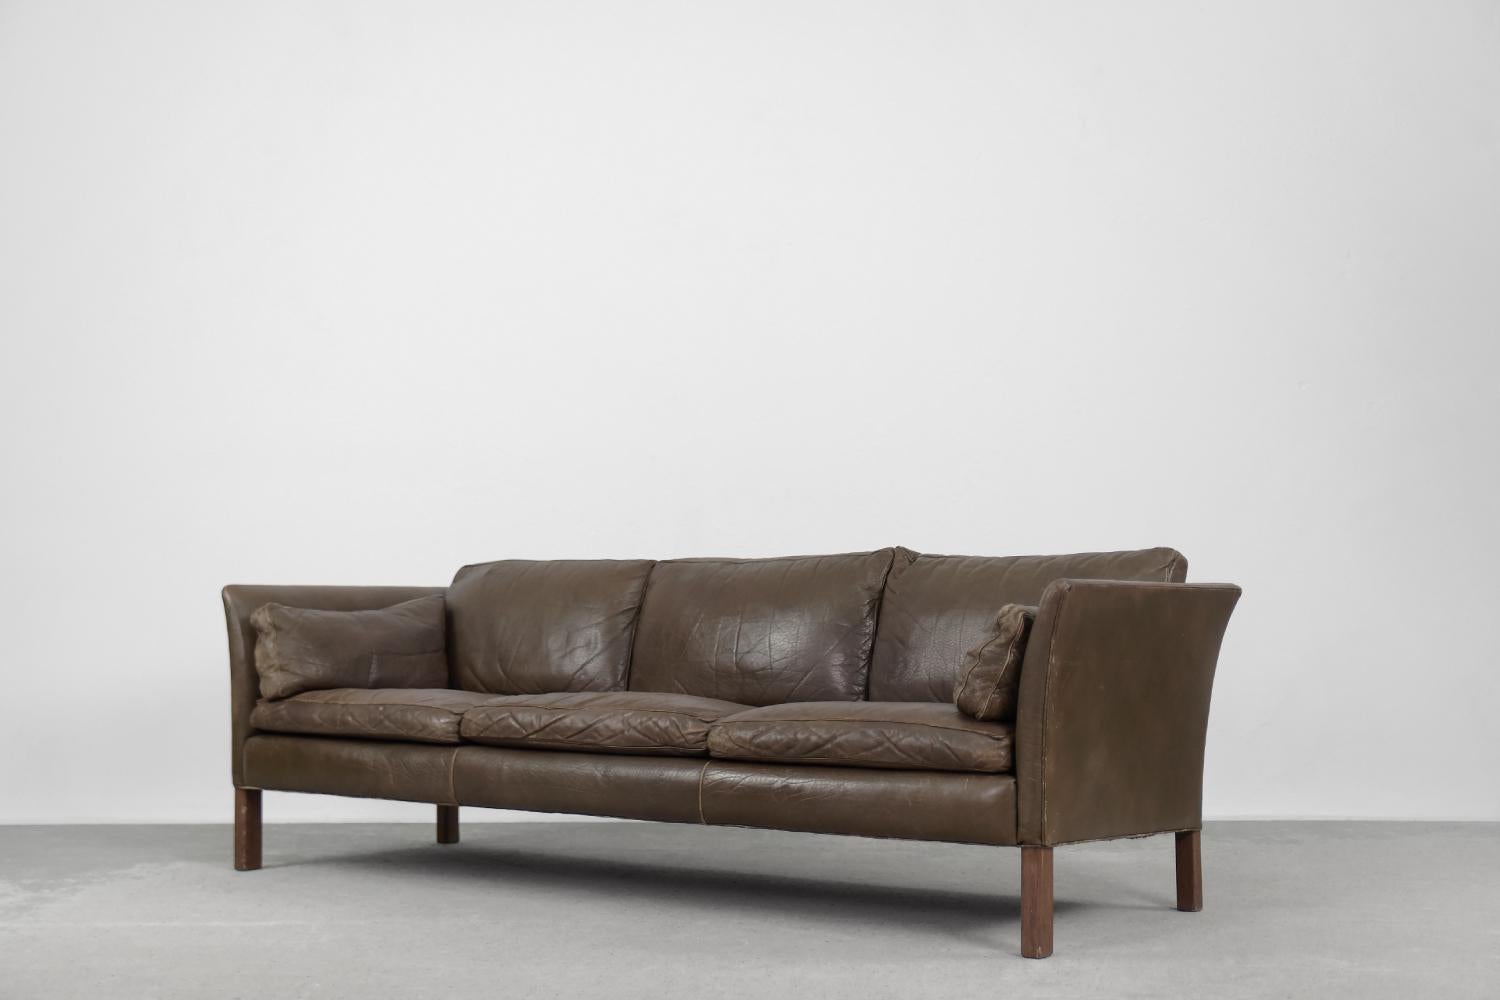 Vintage Mid-Century Modern Swedish Leather Cromwell Sofa by Arne Norell, 1960s For Sale 12